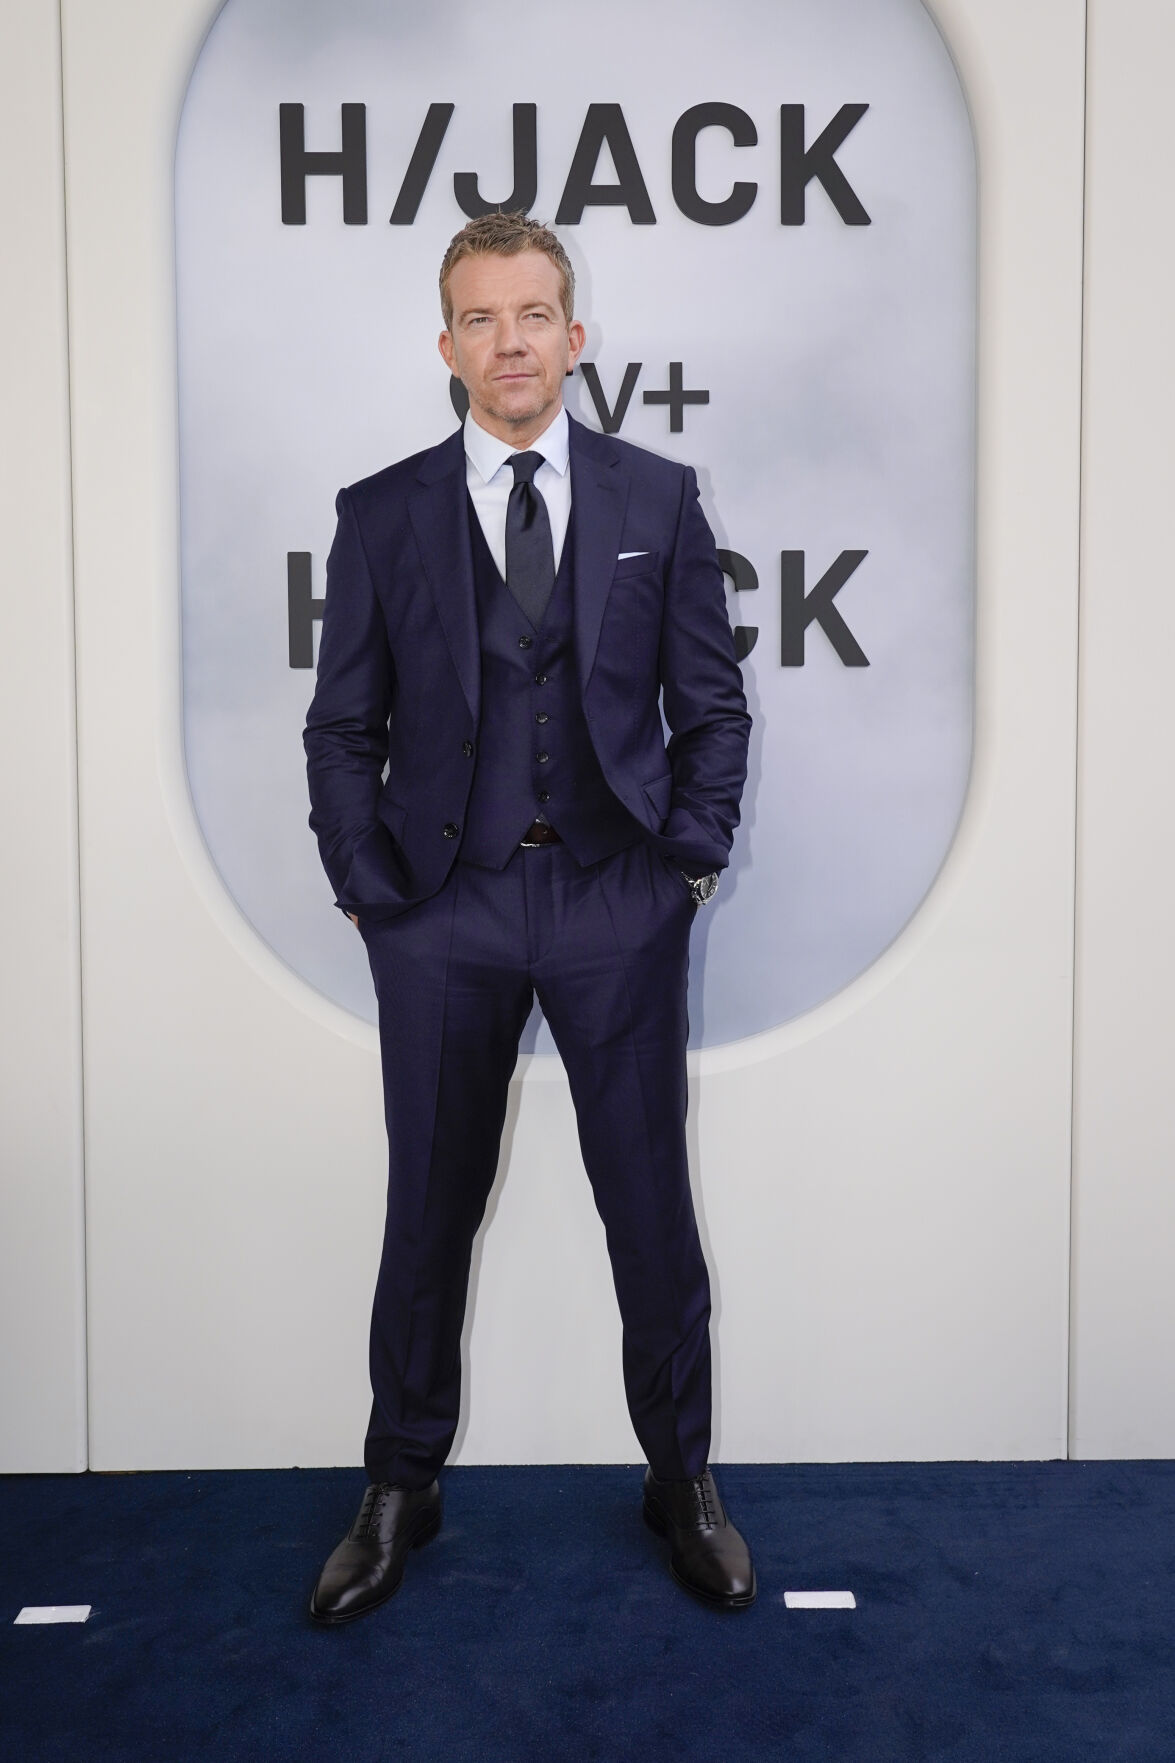 Max Beesley attends the global premiere of "Hijack" at BFI Southbank on June 27, 2023 in London, England. "Hijack” premieres globally on Apple TV+ on Wednesday, June 28, 2023.